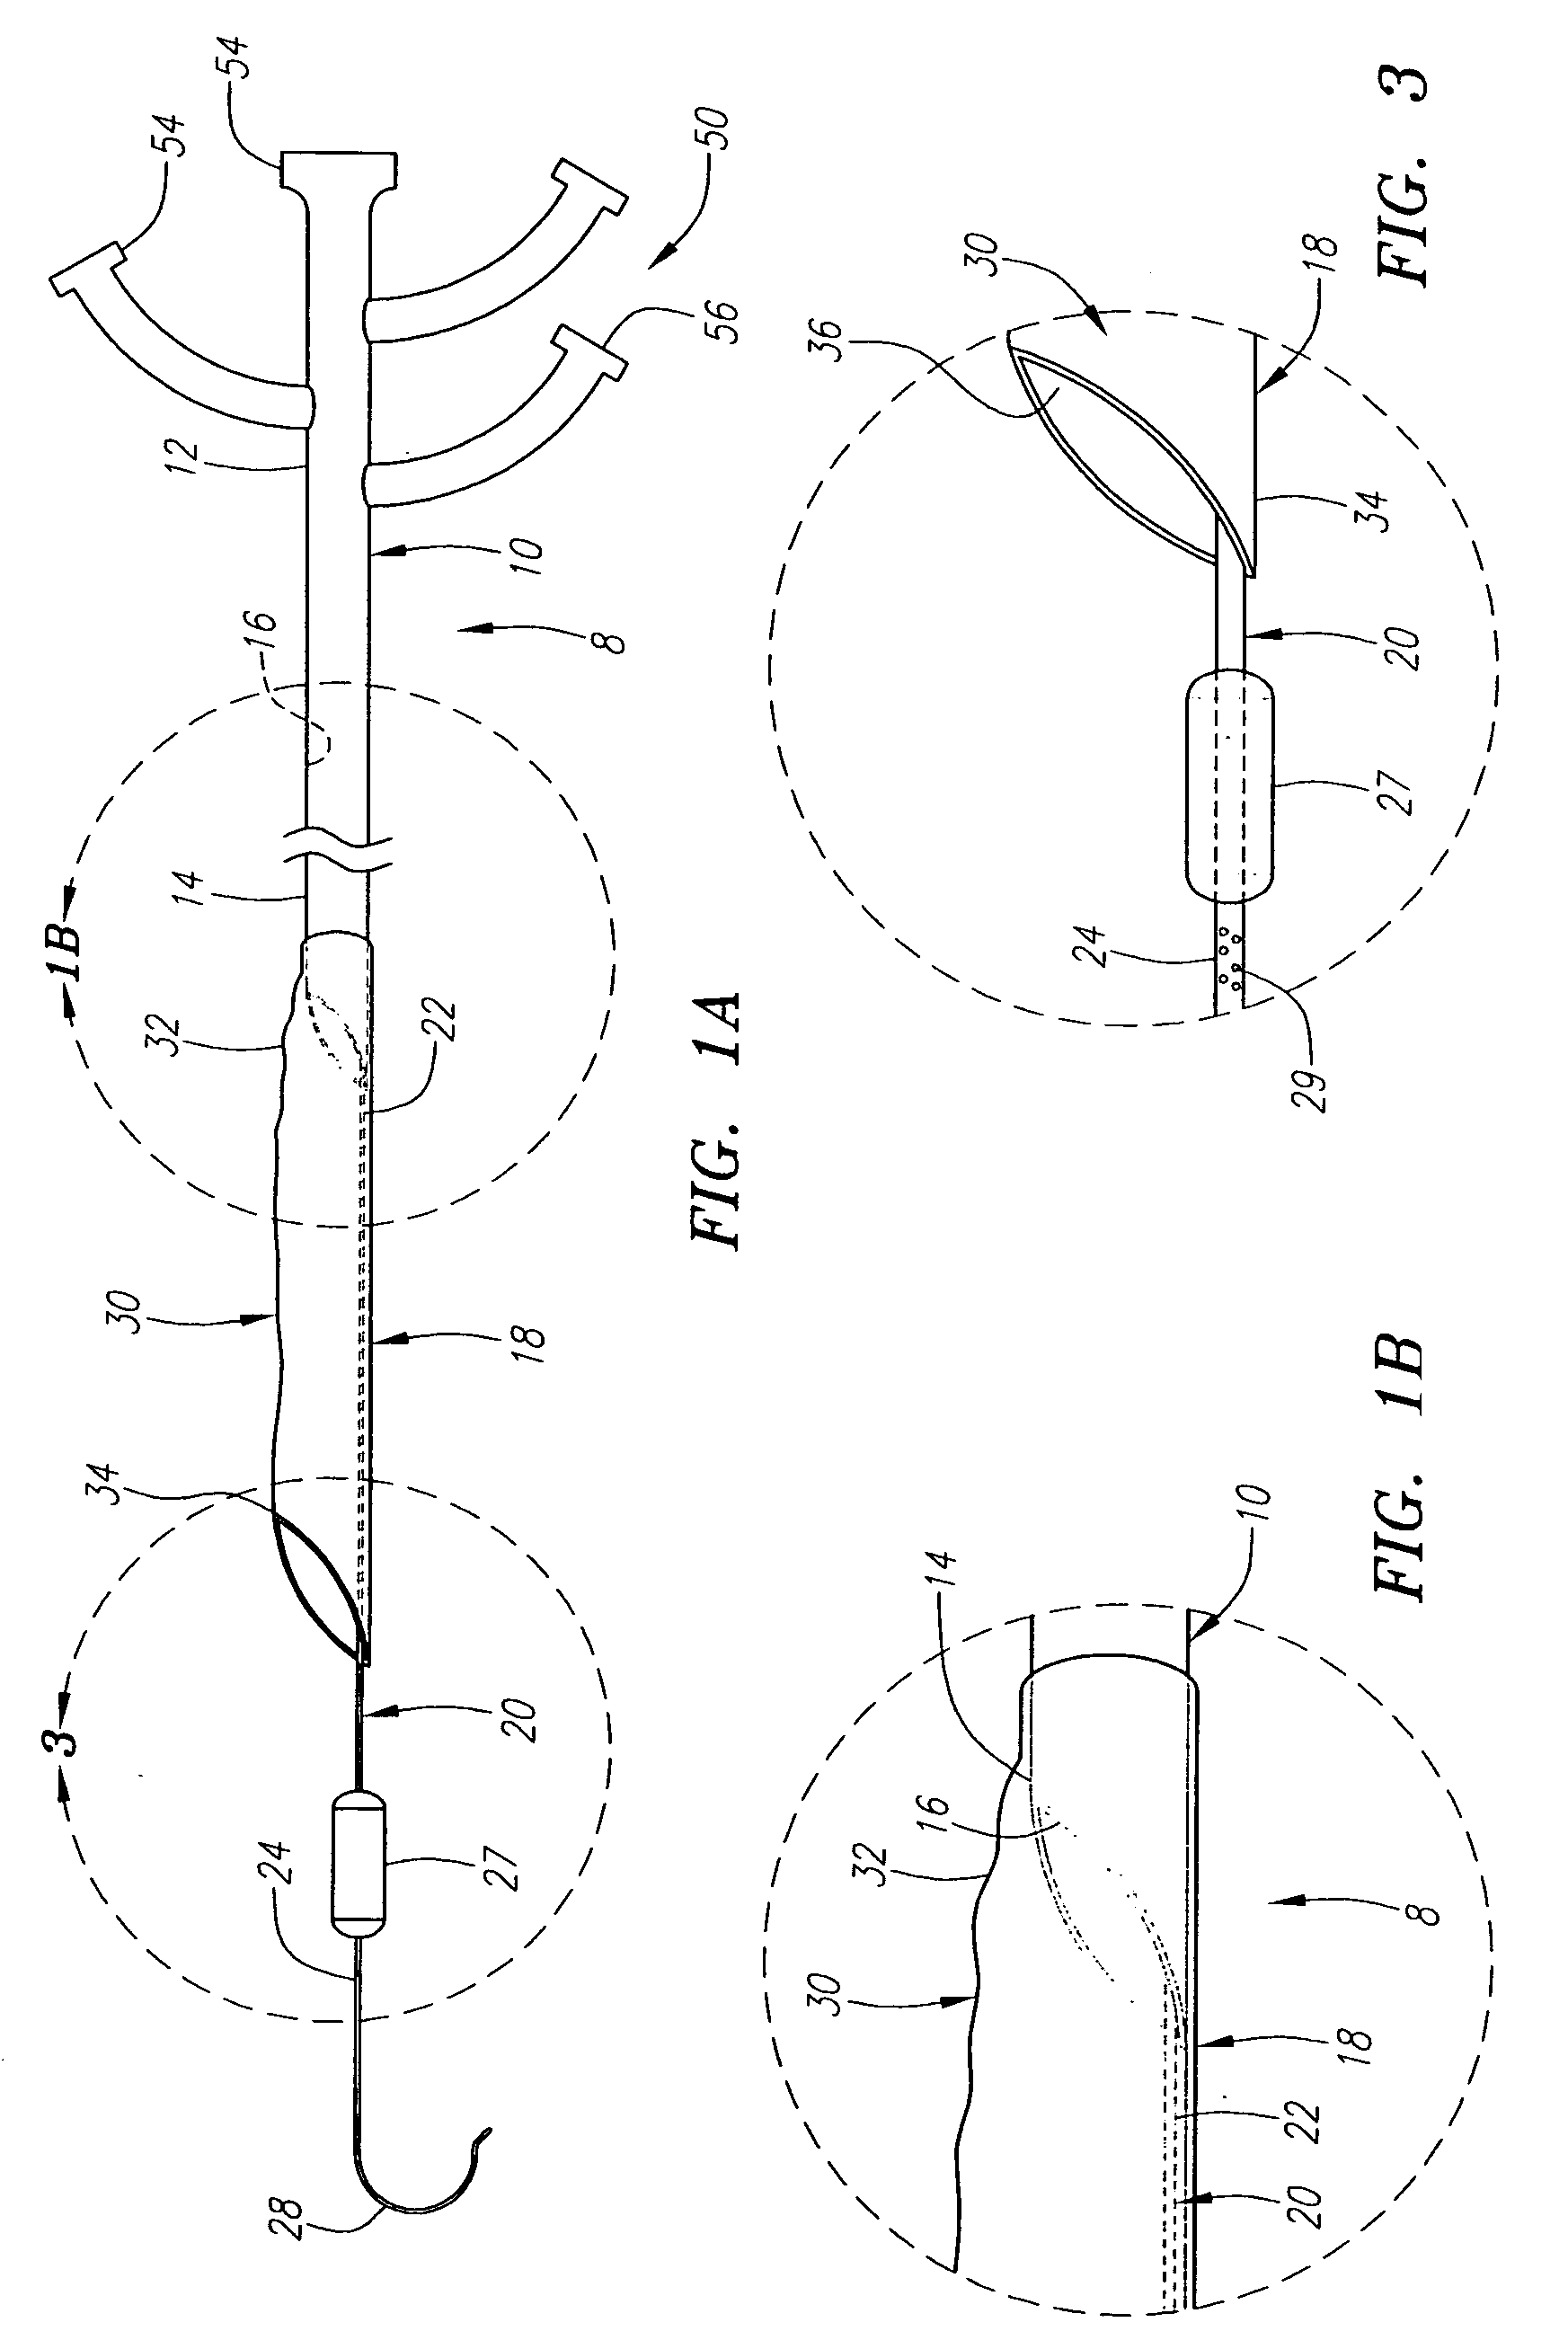 Expandable guide sheath and apparatus and methods for making them